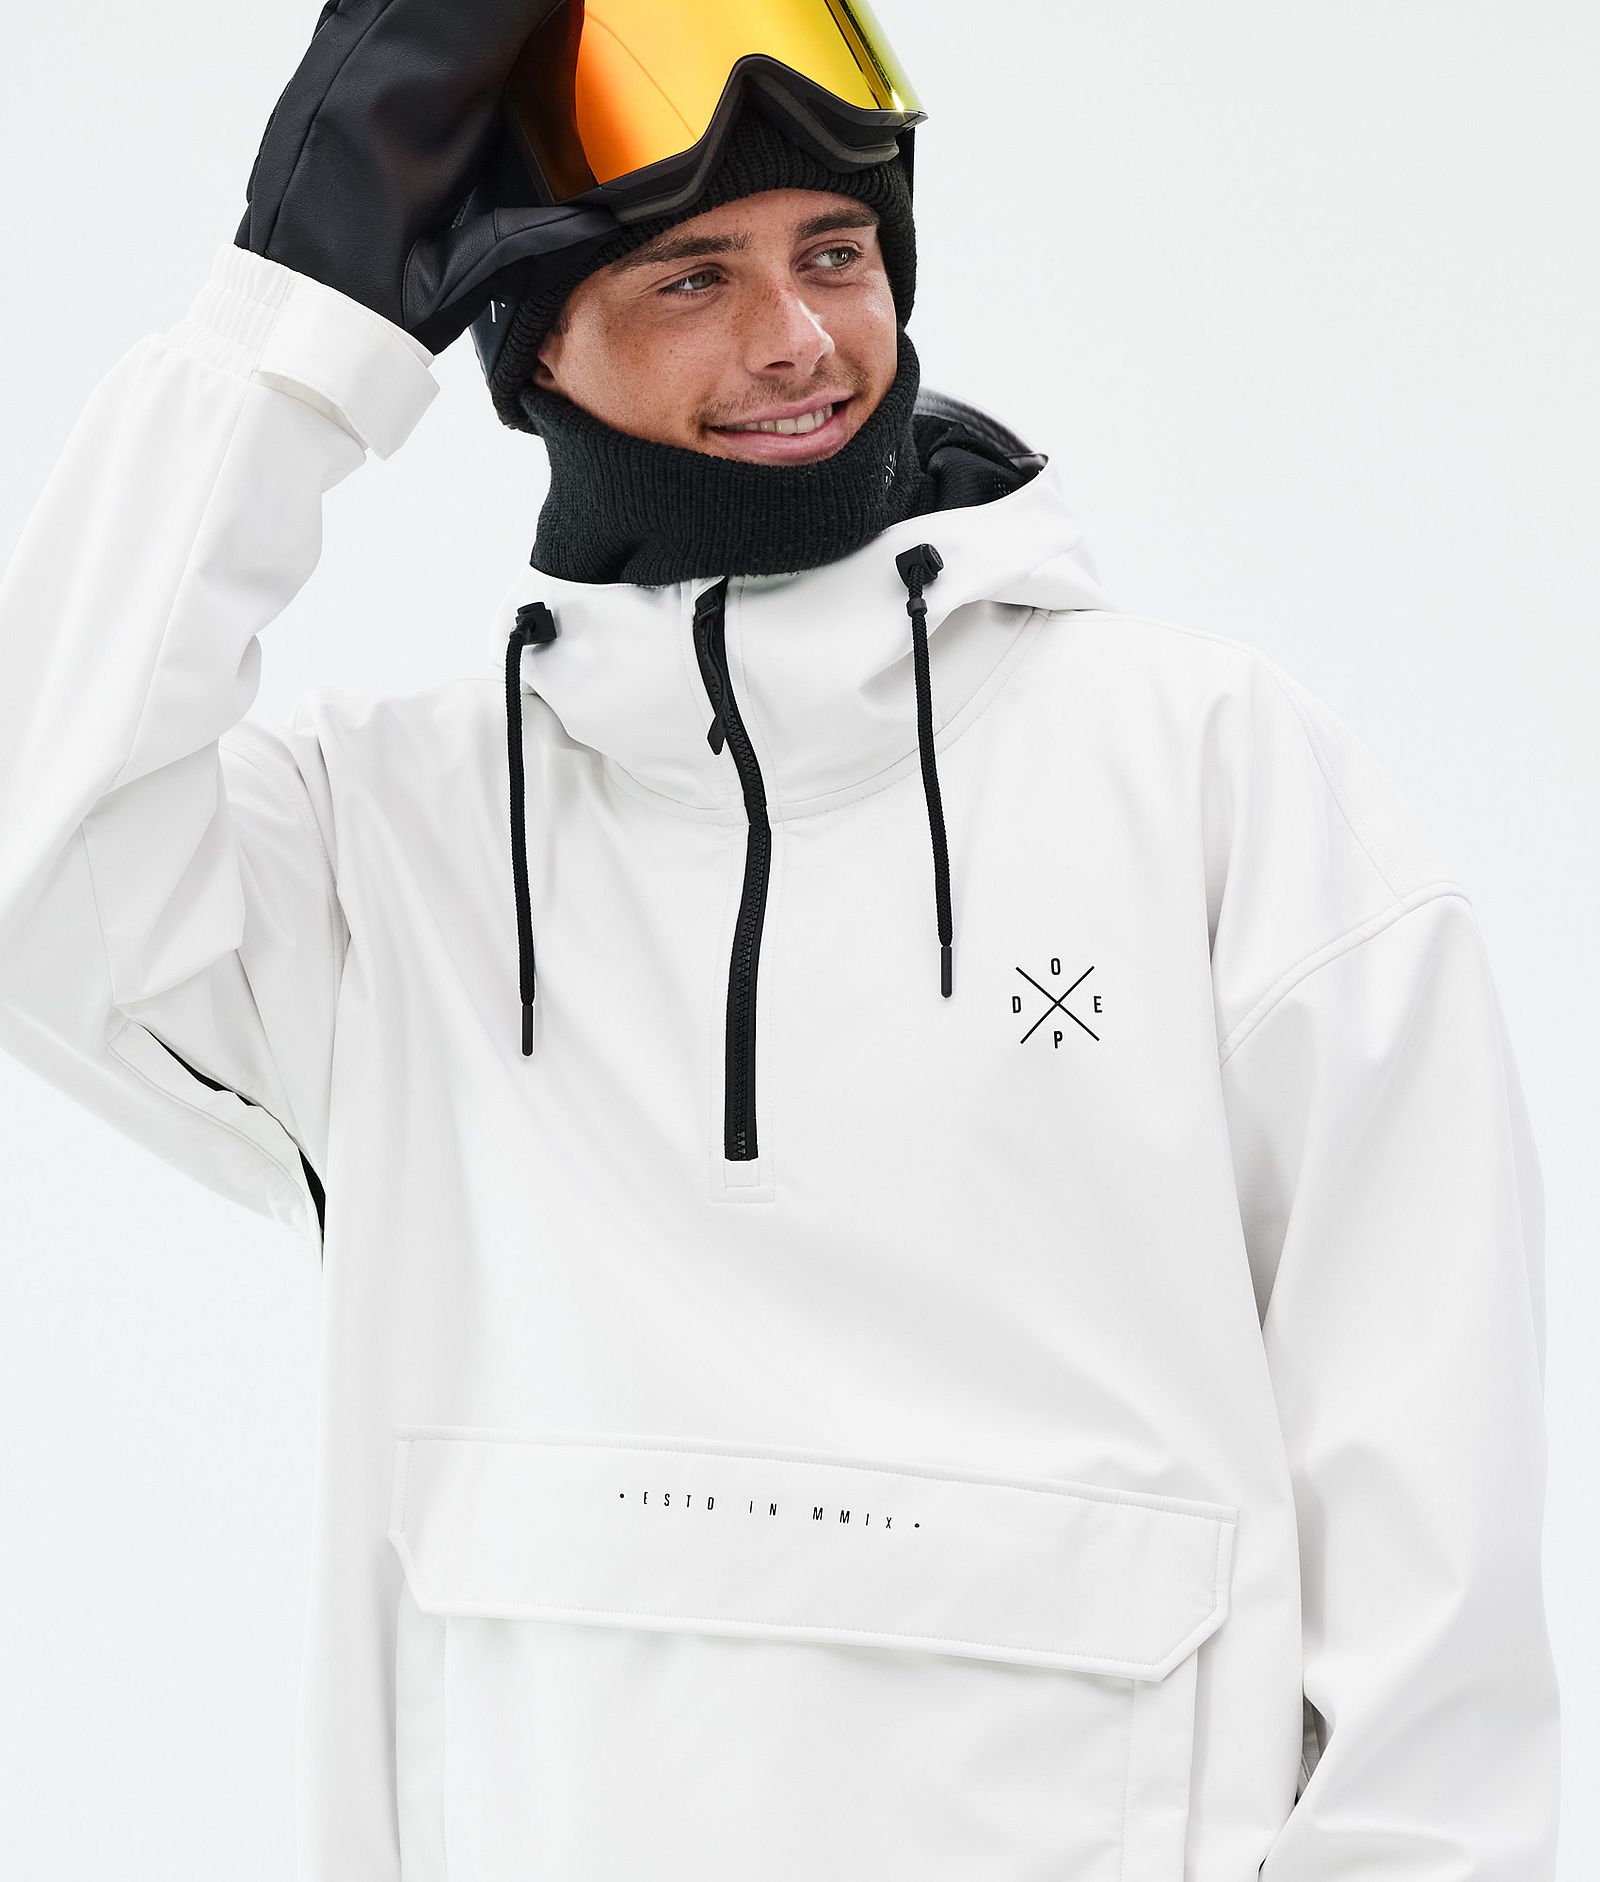 Dope Cyclone Veste Snowboard Homme Old White